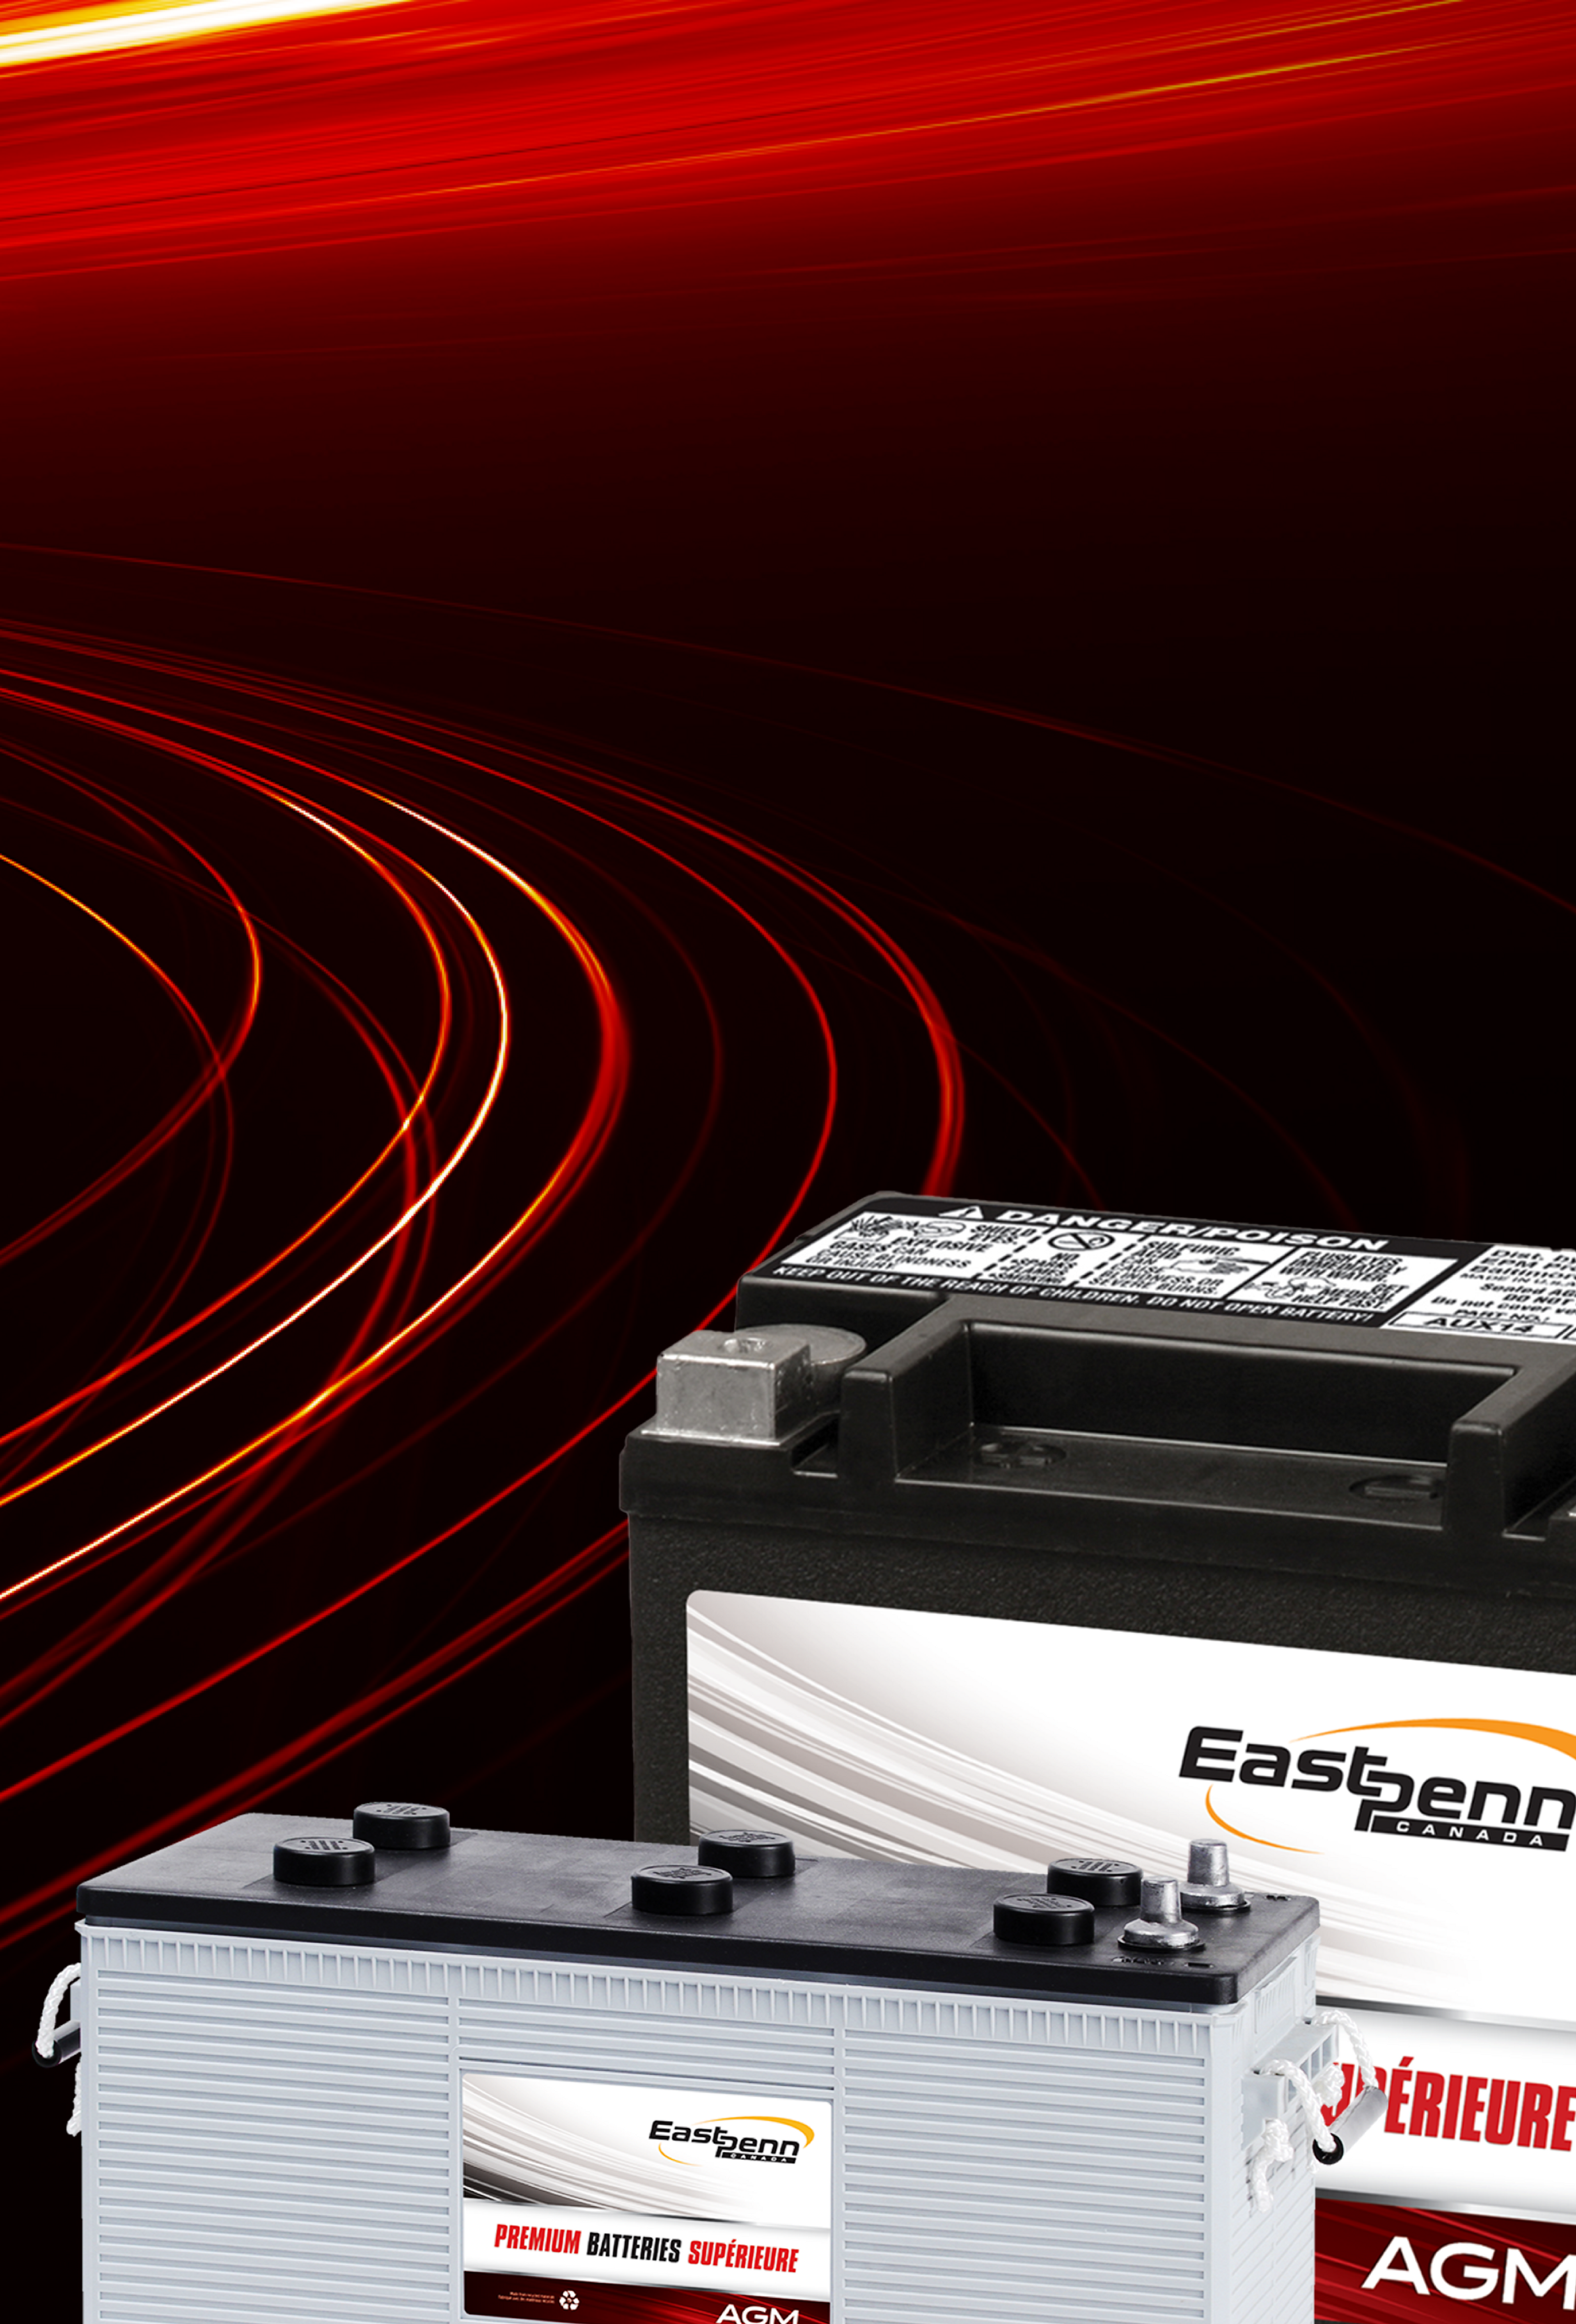 Picture of two East Penn brand car batteries on a black background with red and orange light flares